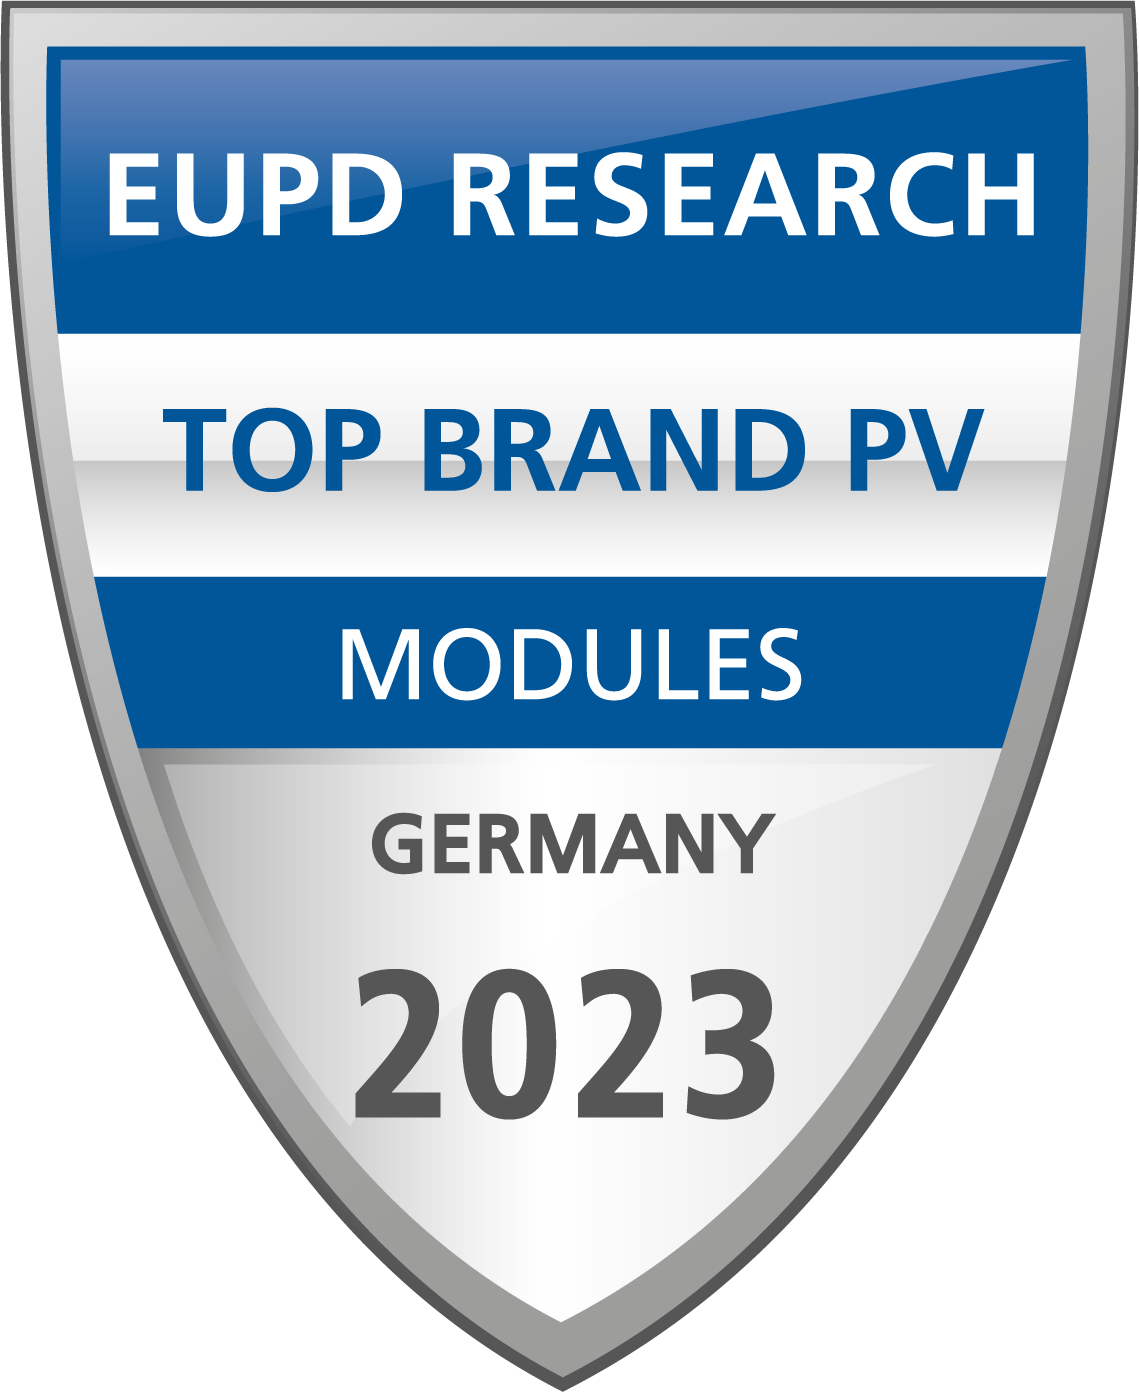 EUPD TOP BRAND PV - modules 2023 - Germany